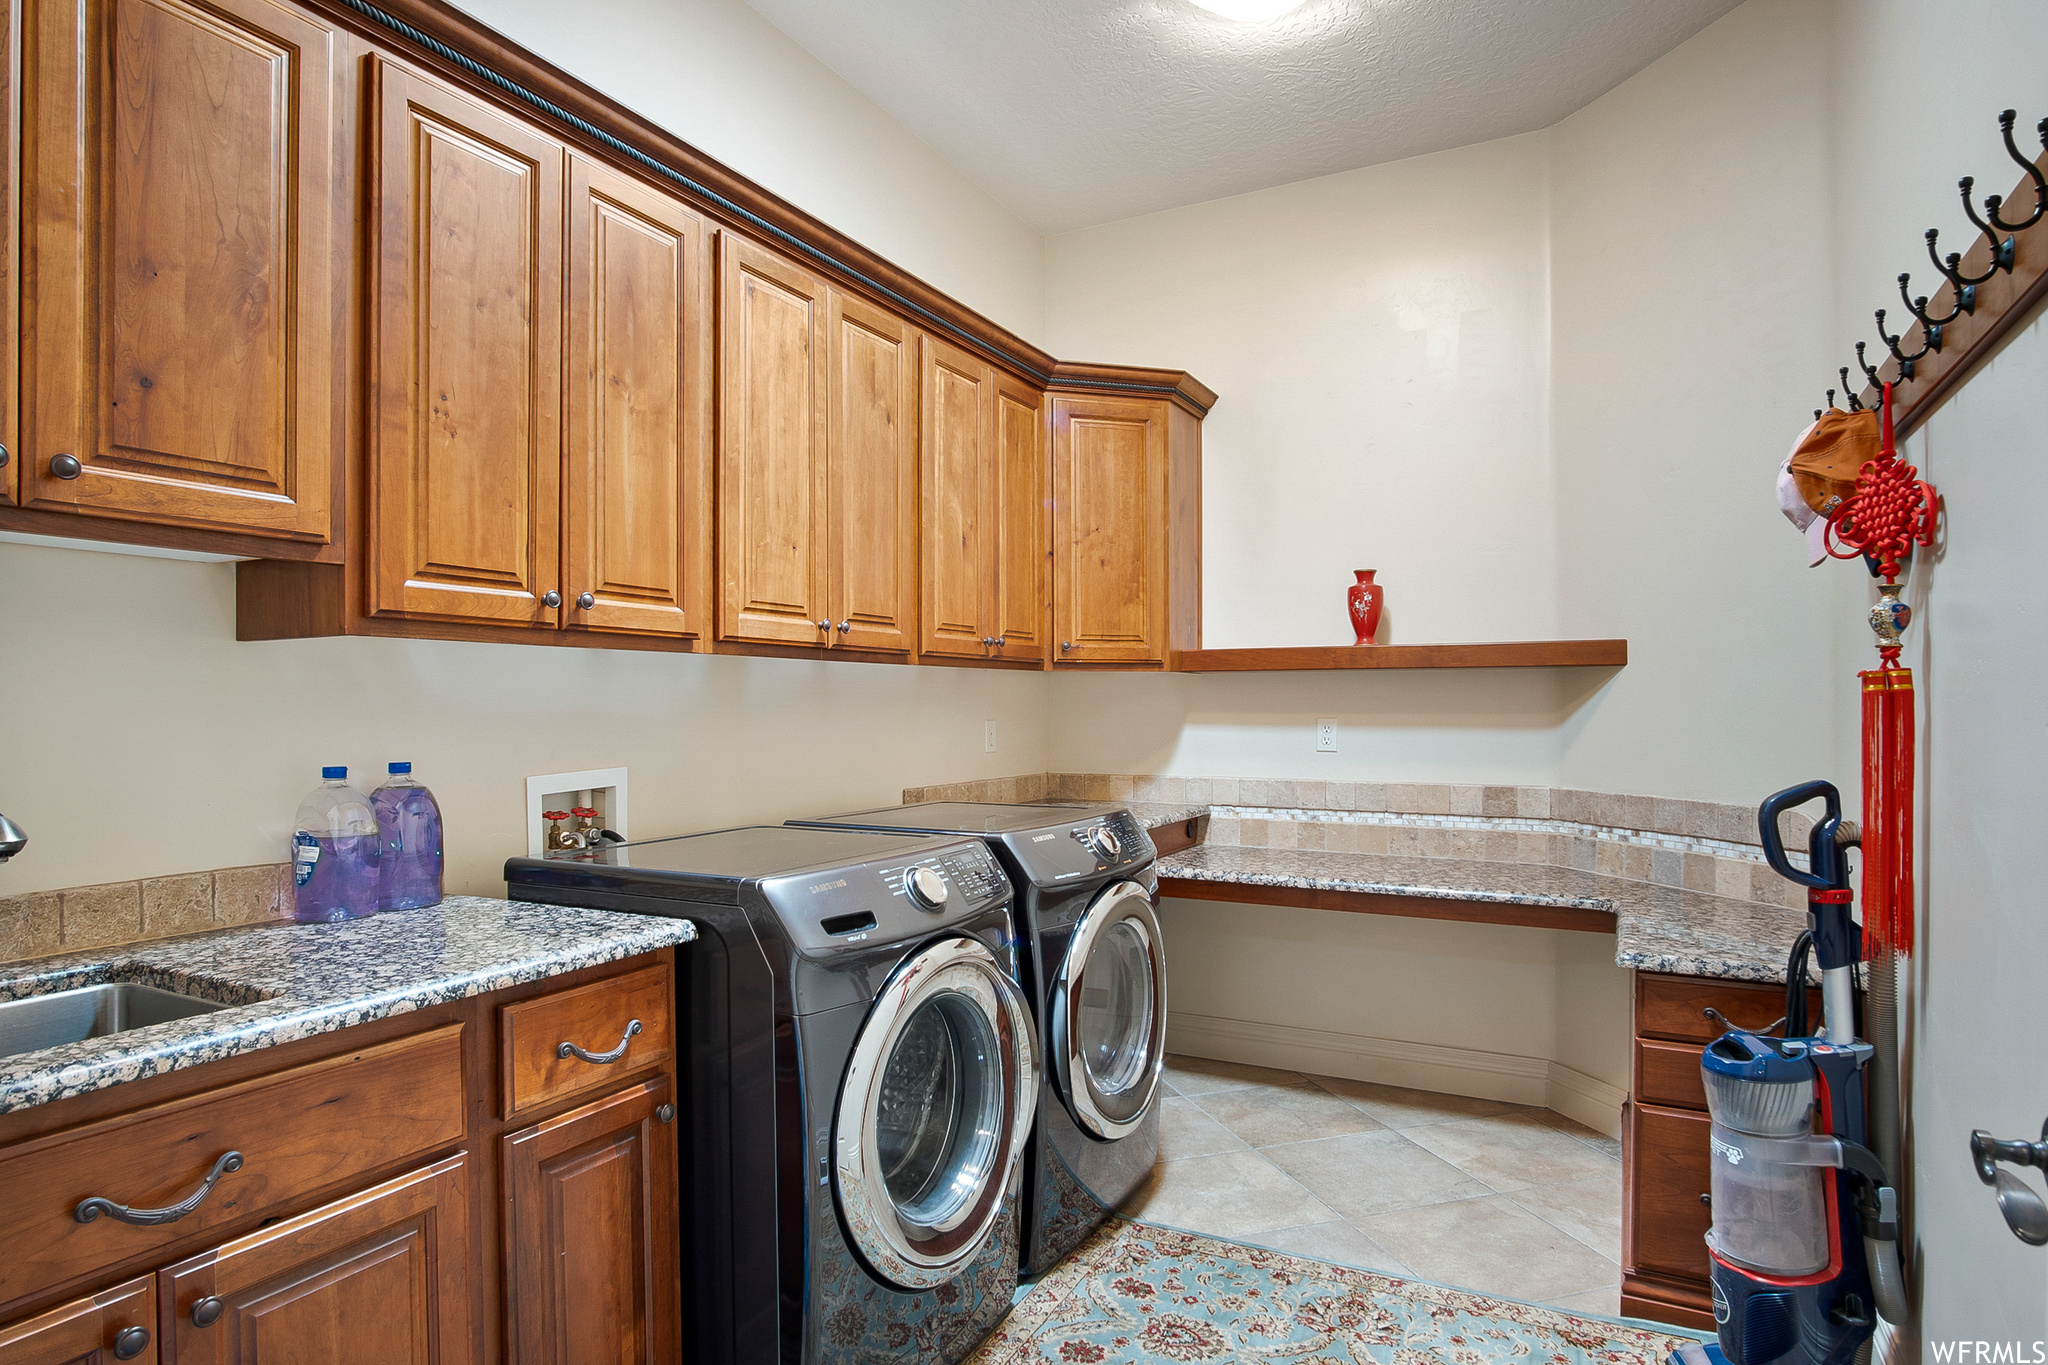 Laundry area featuring tile floors